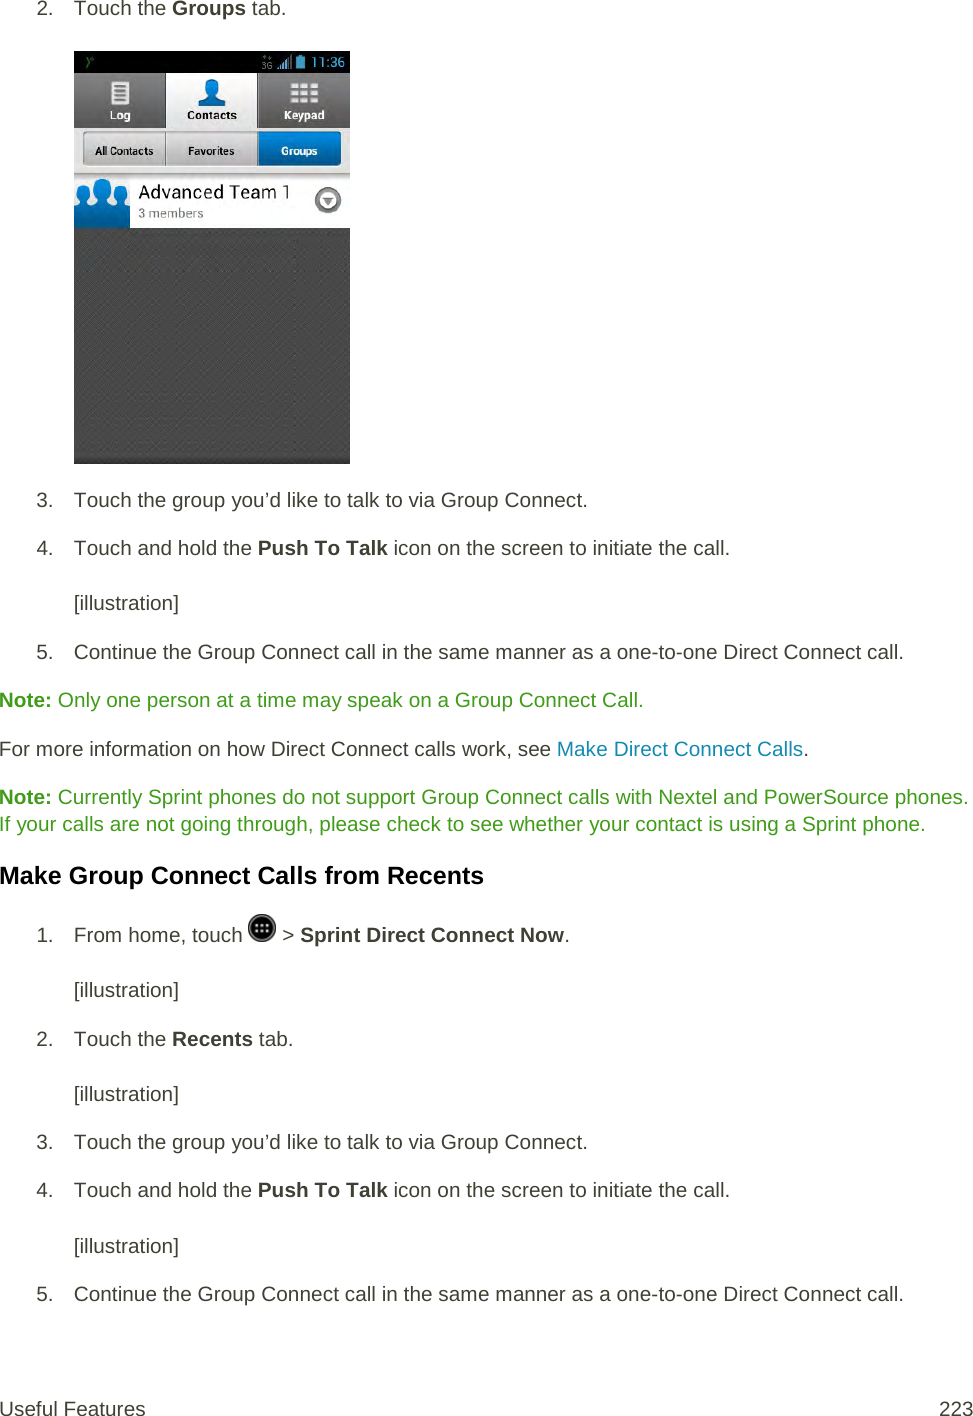 2. Touch the Groups tab.   3. Touch the group you’d like to talk to via Group Connect. 4. Touch and hold the Push To Talk icon on the screen to initiate the call.   [illustration] 5. Continue the Group Connect call in the same manner as a one-to-one Direct Connect call. Note: Only one person at a time may speak on a Group Connect Call. For more information on how Direct Connect calls work, see Make Direct Connect Calls. Note: Currently Sprint phones do not support Group Connect calls with Nextel and PowerSource phones. If your calls are not going through, please check to see whether your contact is using a Sprint phone. Make Group Connect Calls from Recents 1.  From home, touch   &gt; Sprint Direct Connect Now.   [illustration] 2. Touch the Recents tab.   [illustration] 3. Touch the group you’d like to talk to via Group Connect. 4. Touch and hold the Push To Talk icon on the screen to initiate the call.   [illustration] 5. Continue the Group Connect call in the same manner as a one-to-one Direct Connect call. Useful Features 223   